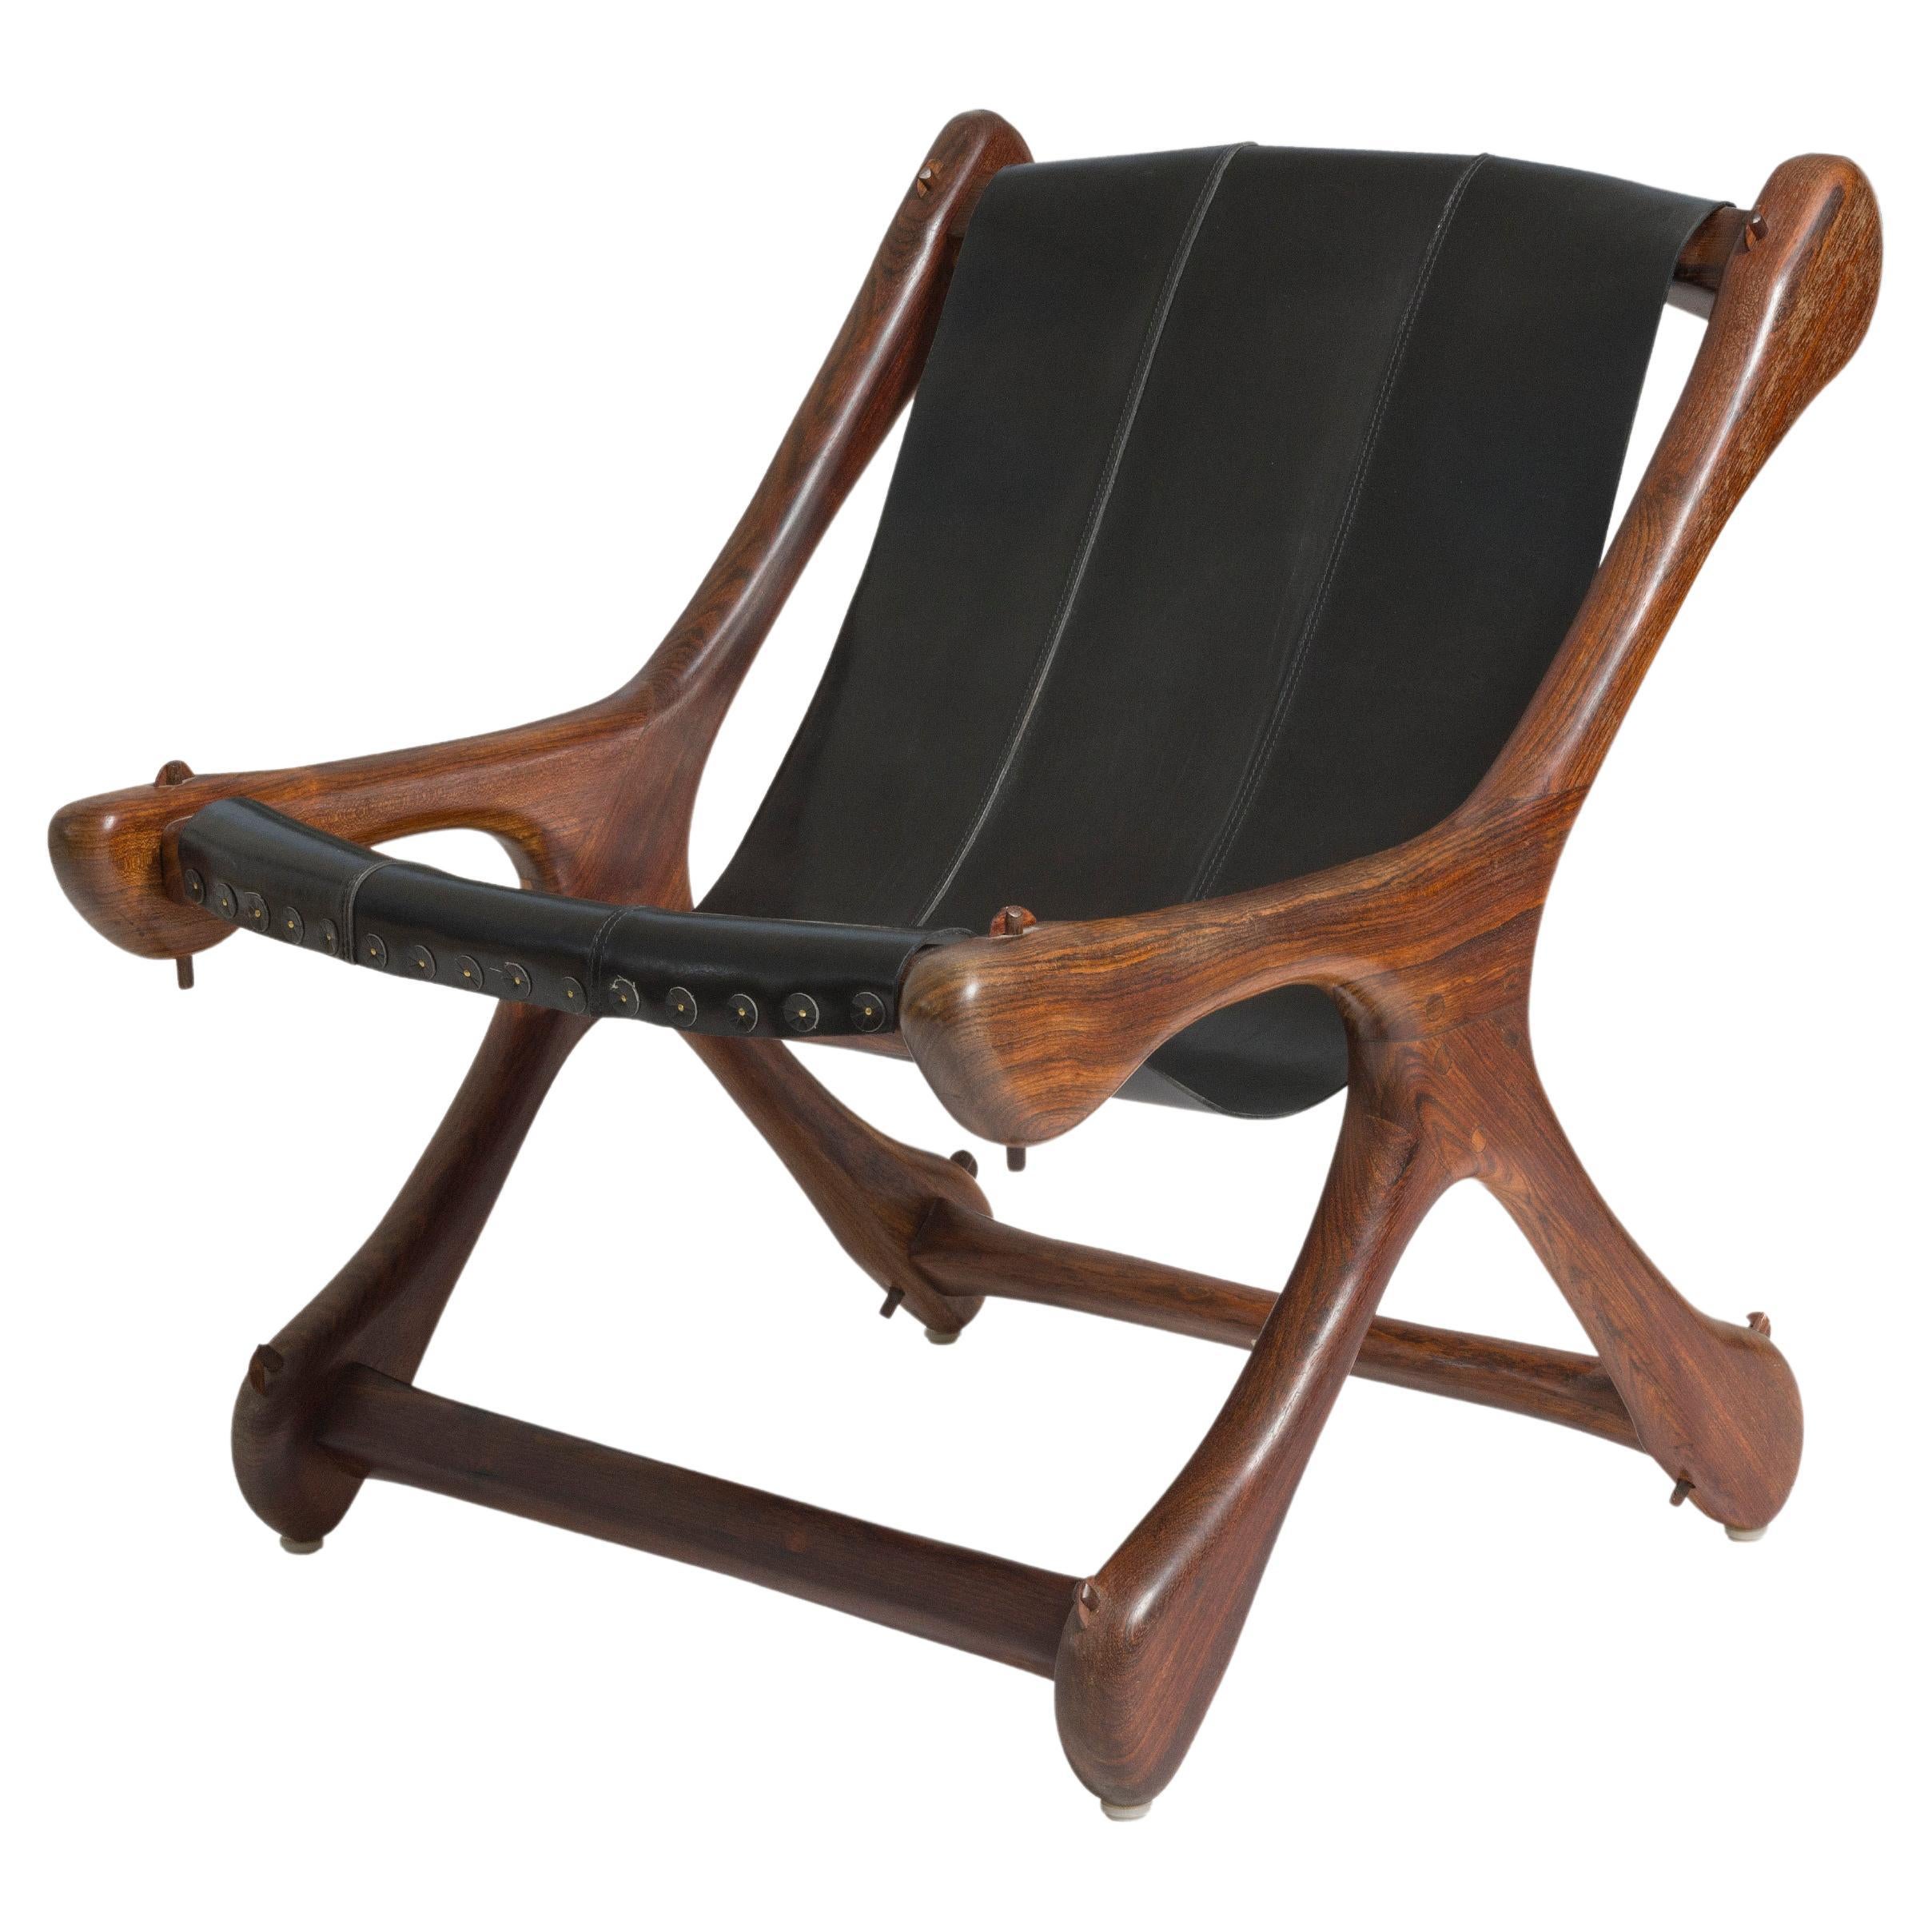 Mexican Modern Lounge Chair, Wood and Leather, 1960's For Sale